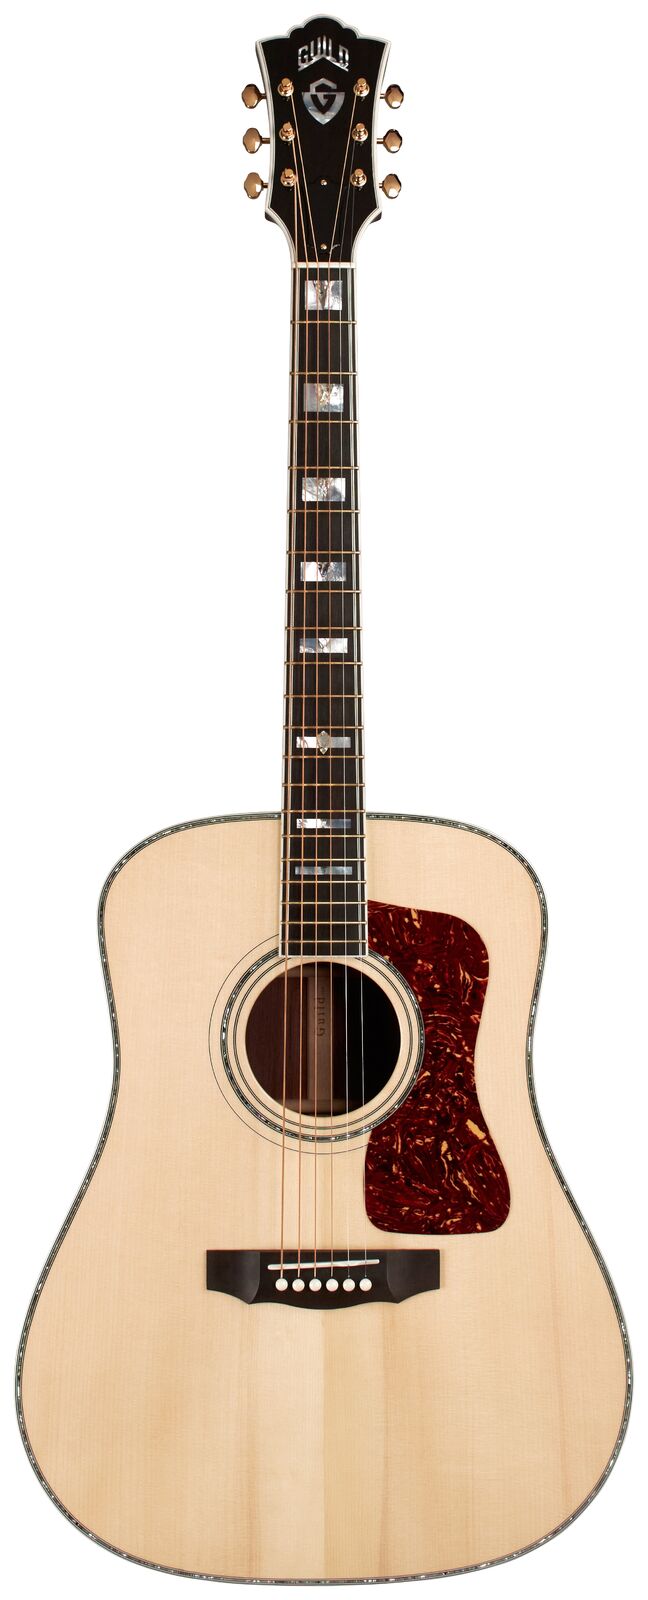 Guild D-55 70th Anniversary Limited Edition Acoustic Guitar (Natural)